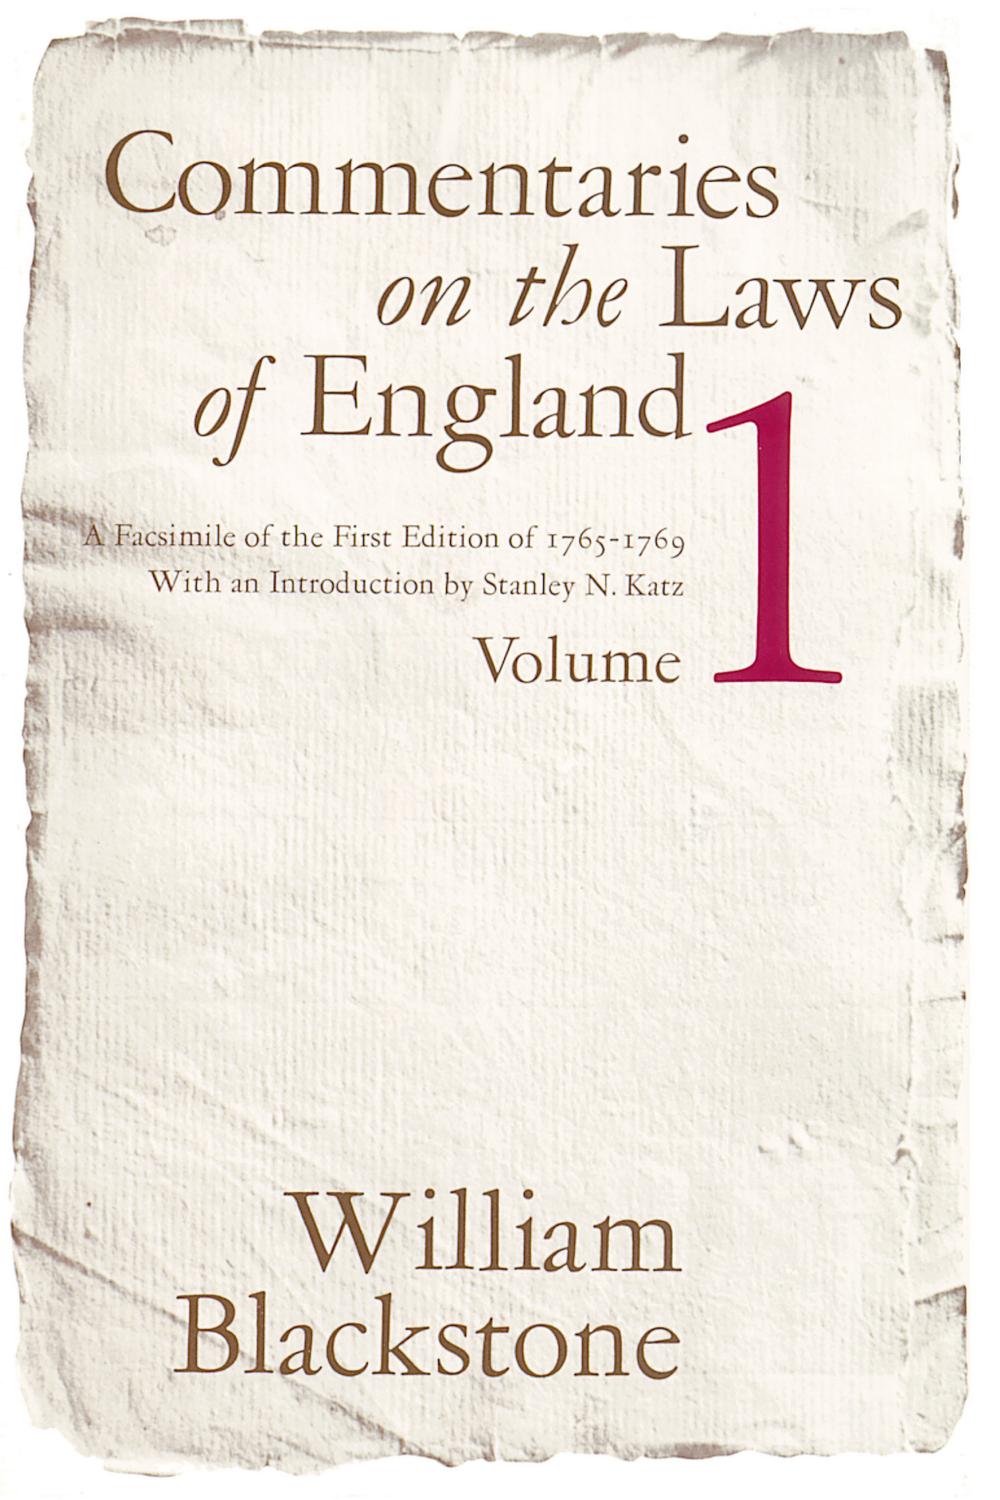 Commentaries on the Laws of England, Volume 1 - William Blackstone